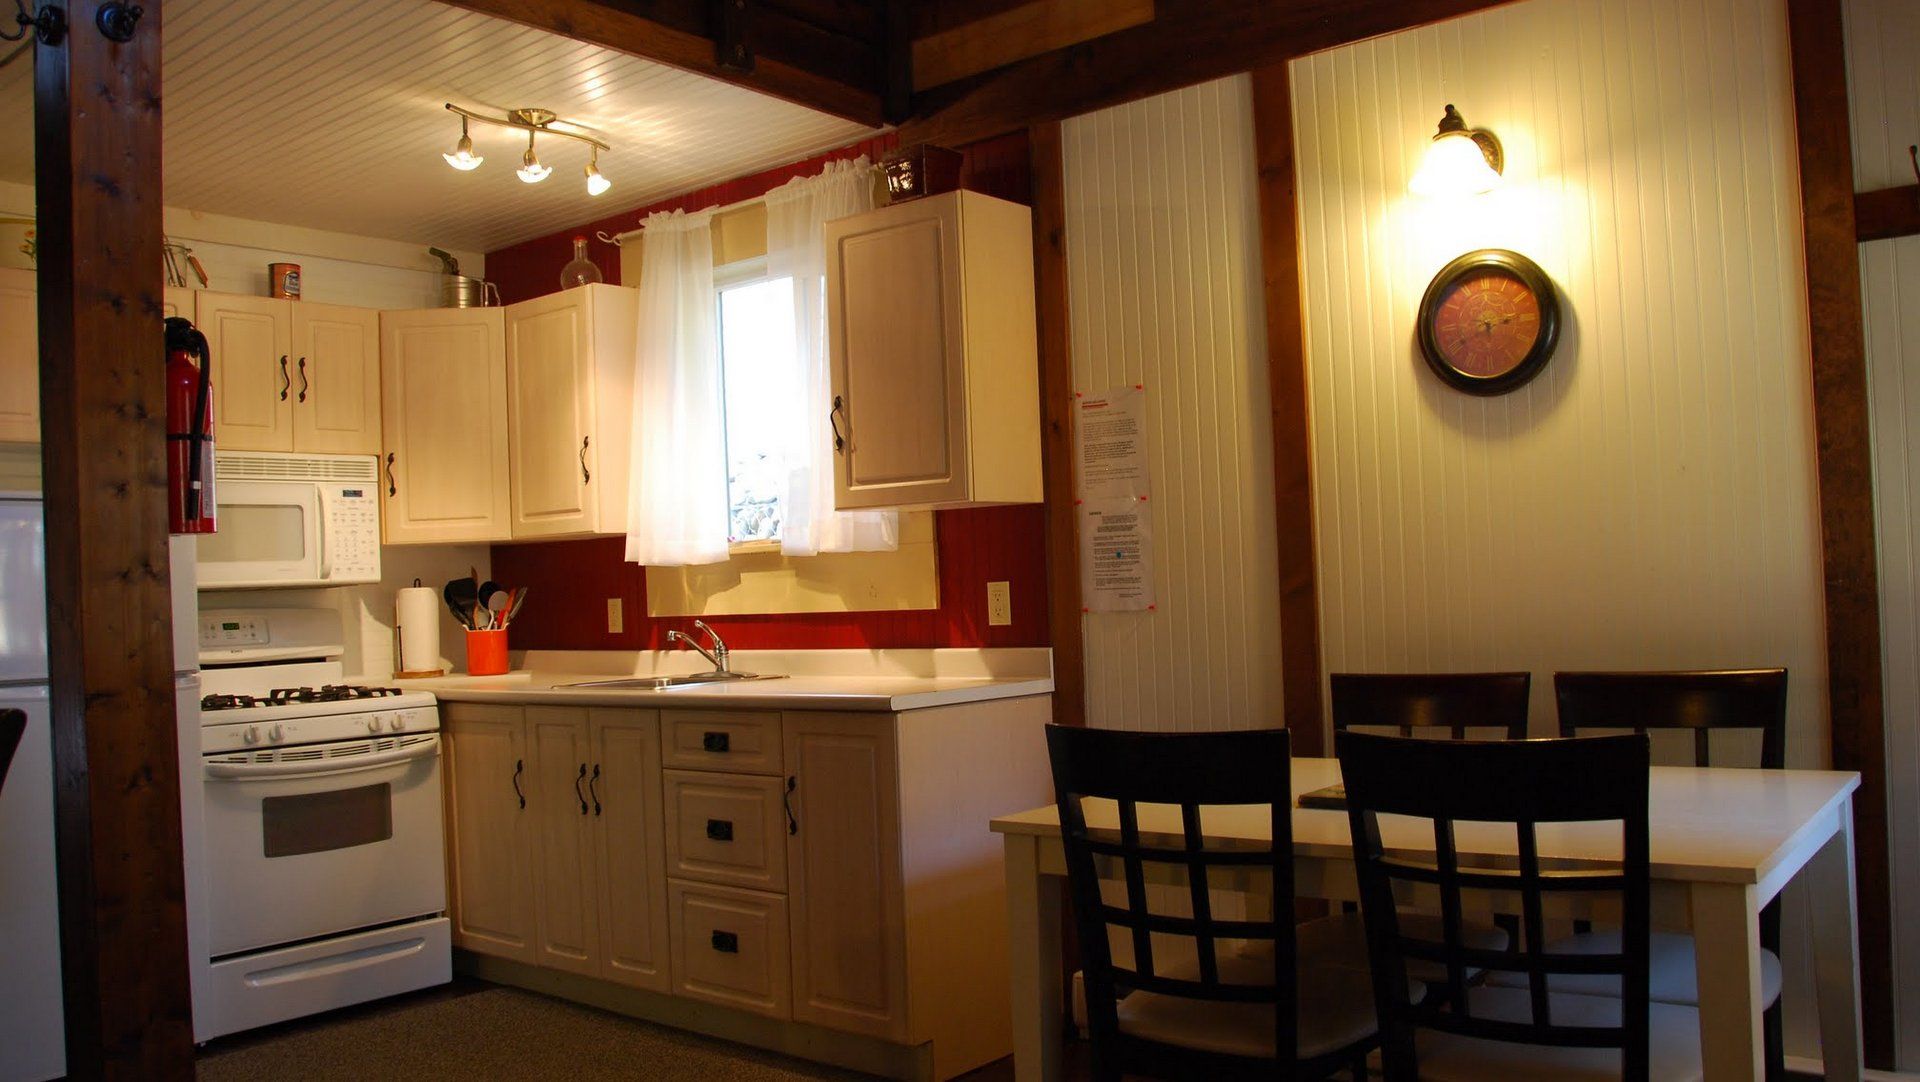 Monashee Cabin kitchen/dining area at Griffin Lake cottage rentals.